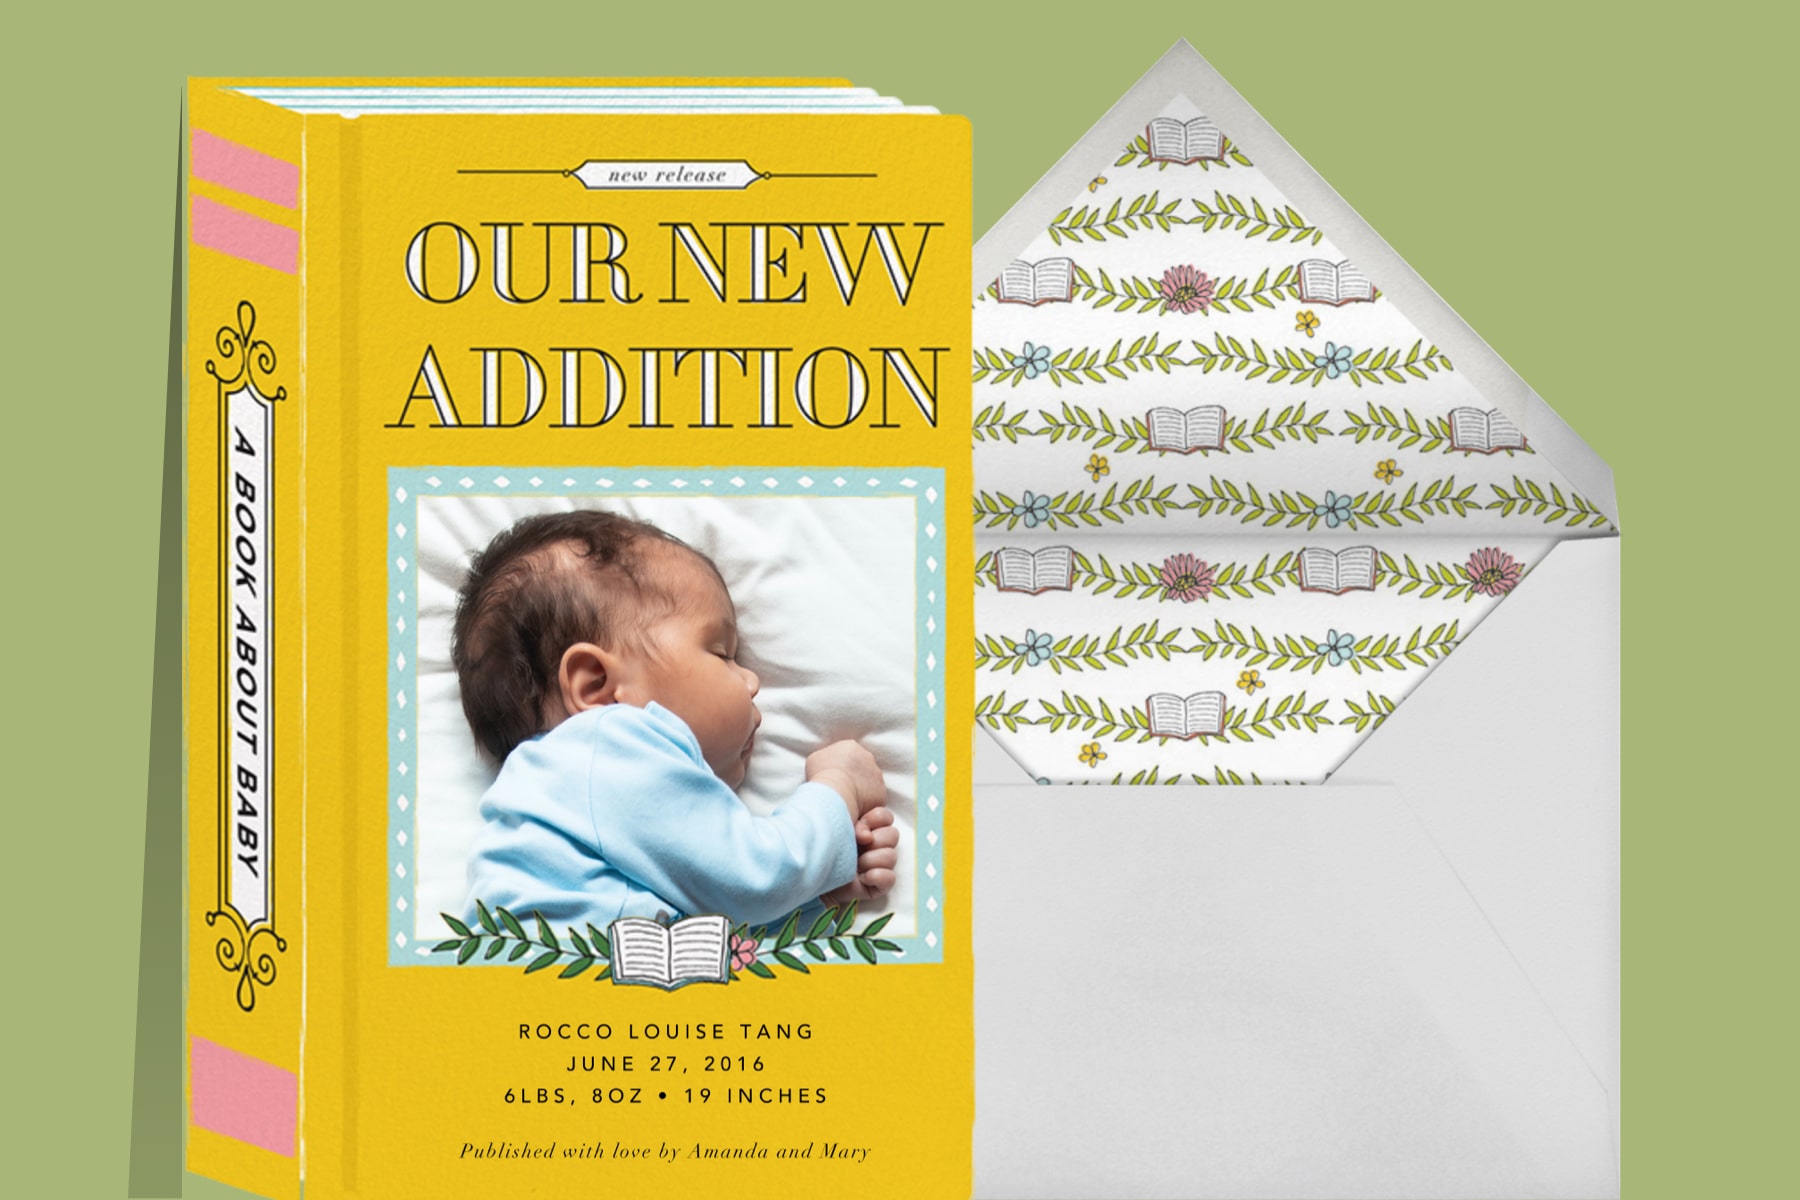 “Chapter One (Photo)” invitation by Cheree Berry Paper & Design for Paperless Post. The yellow card is shaped like a book and features a customizable photo opening. The text reads “Our New Addition.” The card is featured on a green background.